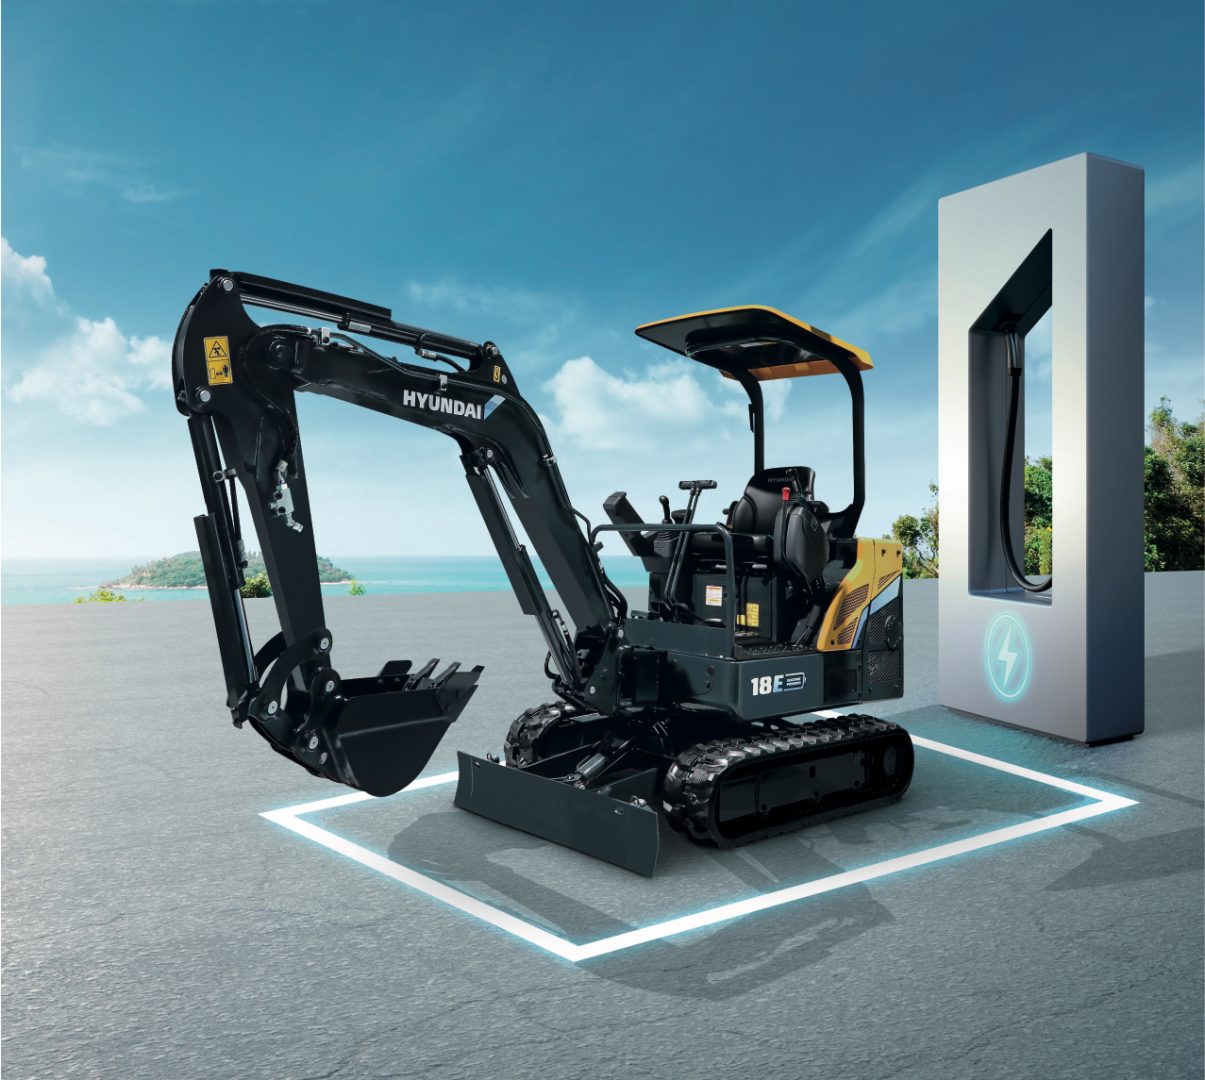 Hyundai to introduce electric and hydrogen excavators in 2023 and 2026.